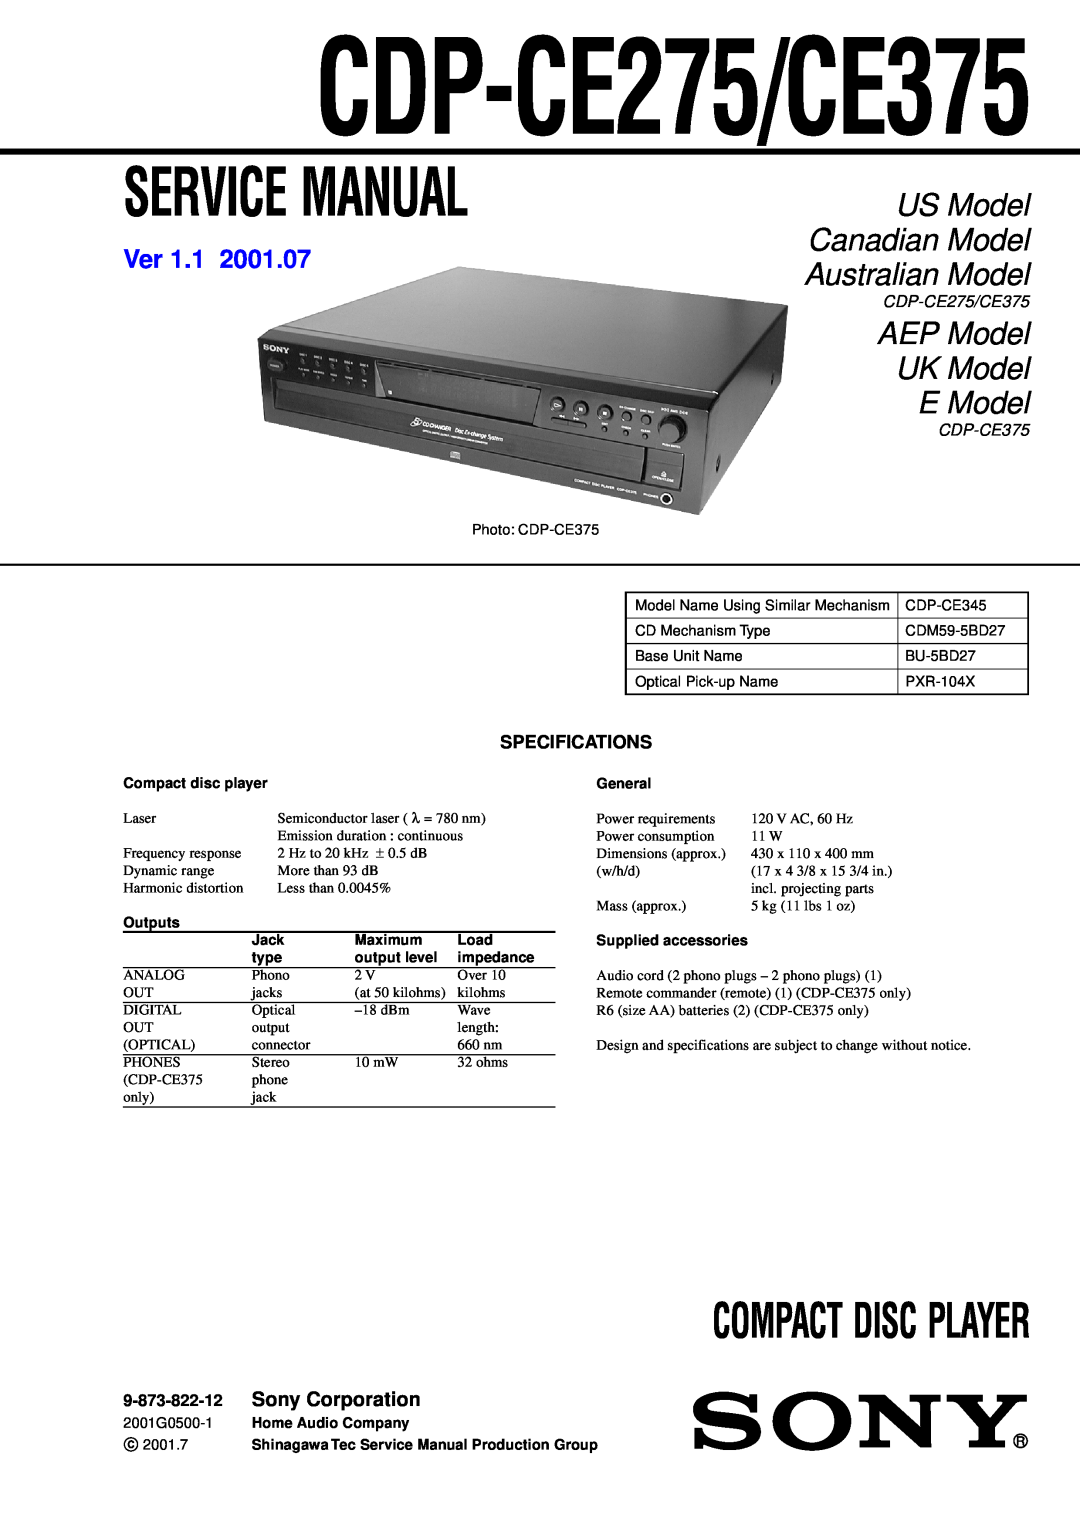 Sony CDP-CE375 service manual Specifications, 9-873-822-12, CDP-CE275/CE375, Compact Disc Player, US Model, AEP Model, Ver 